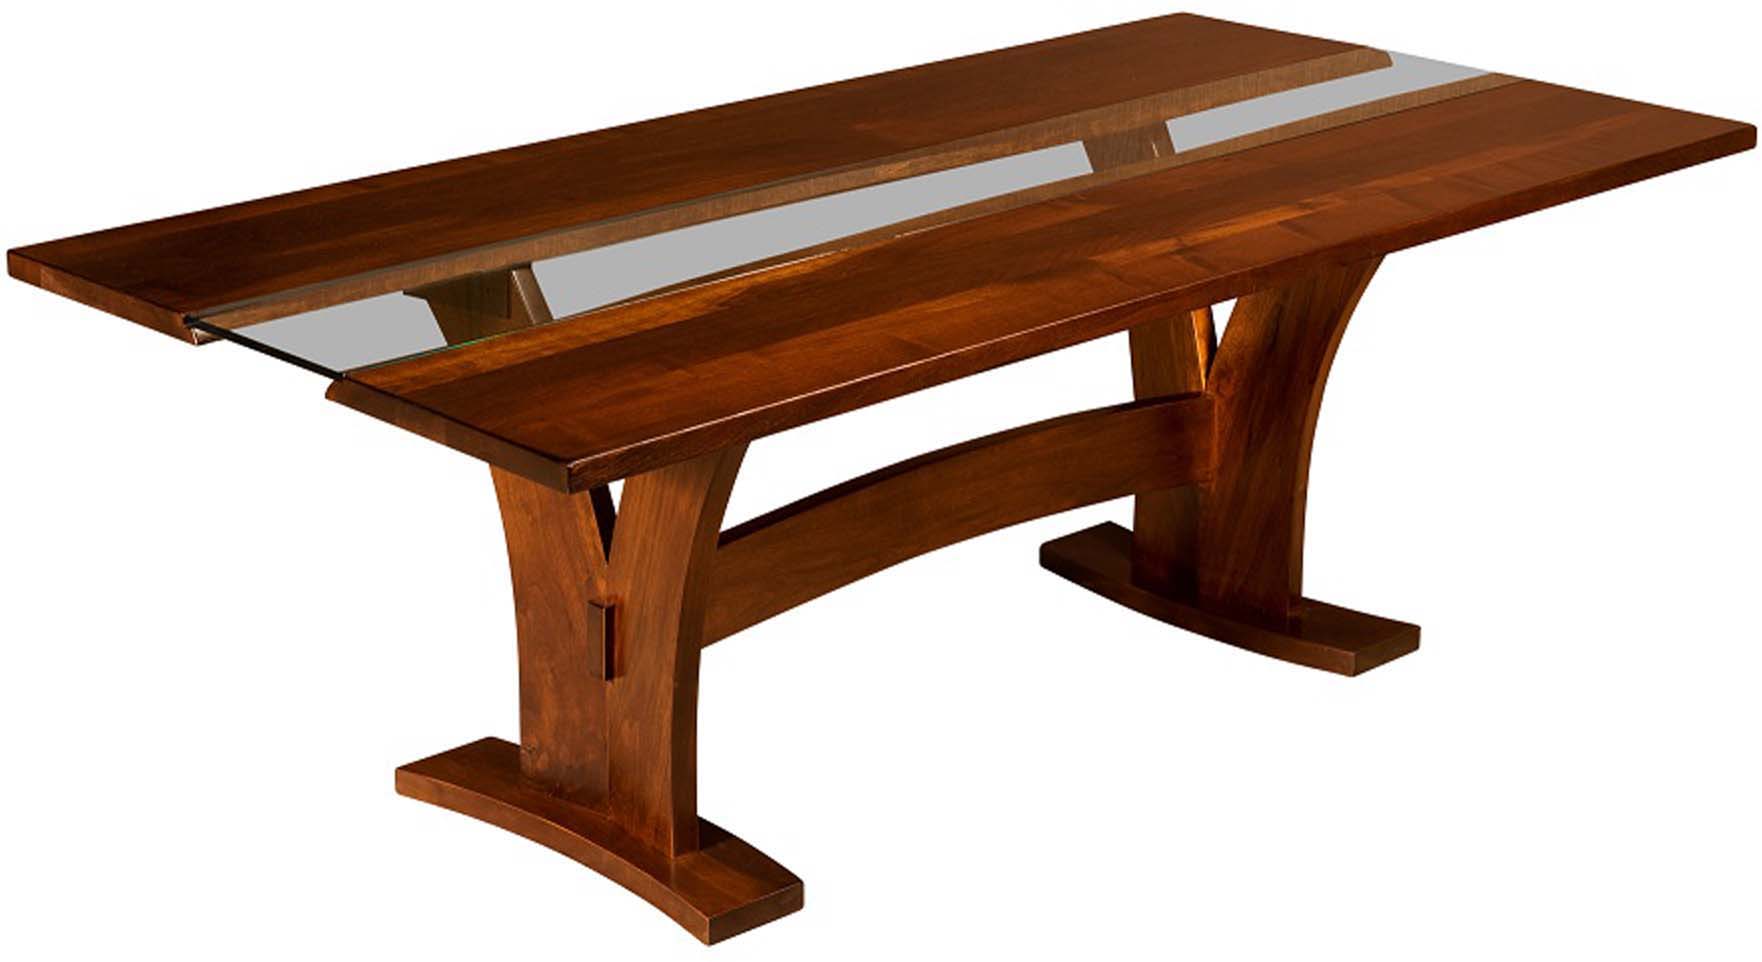 Amish Dining Tables